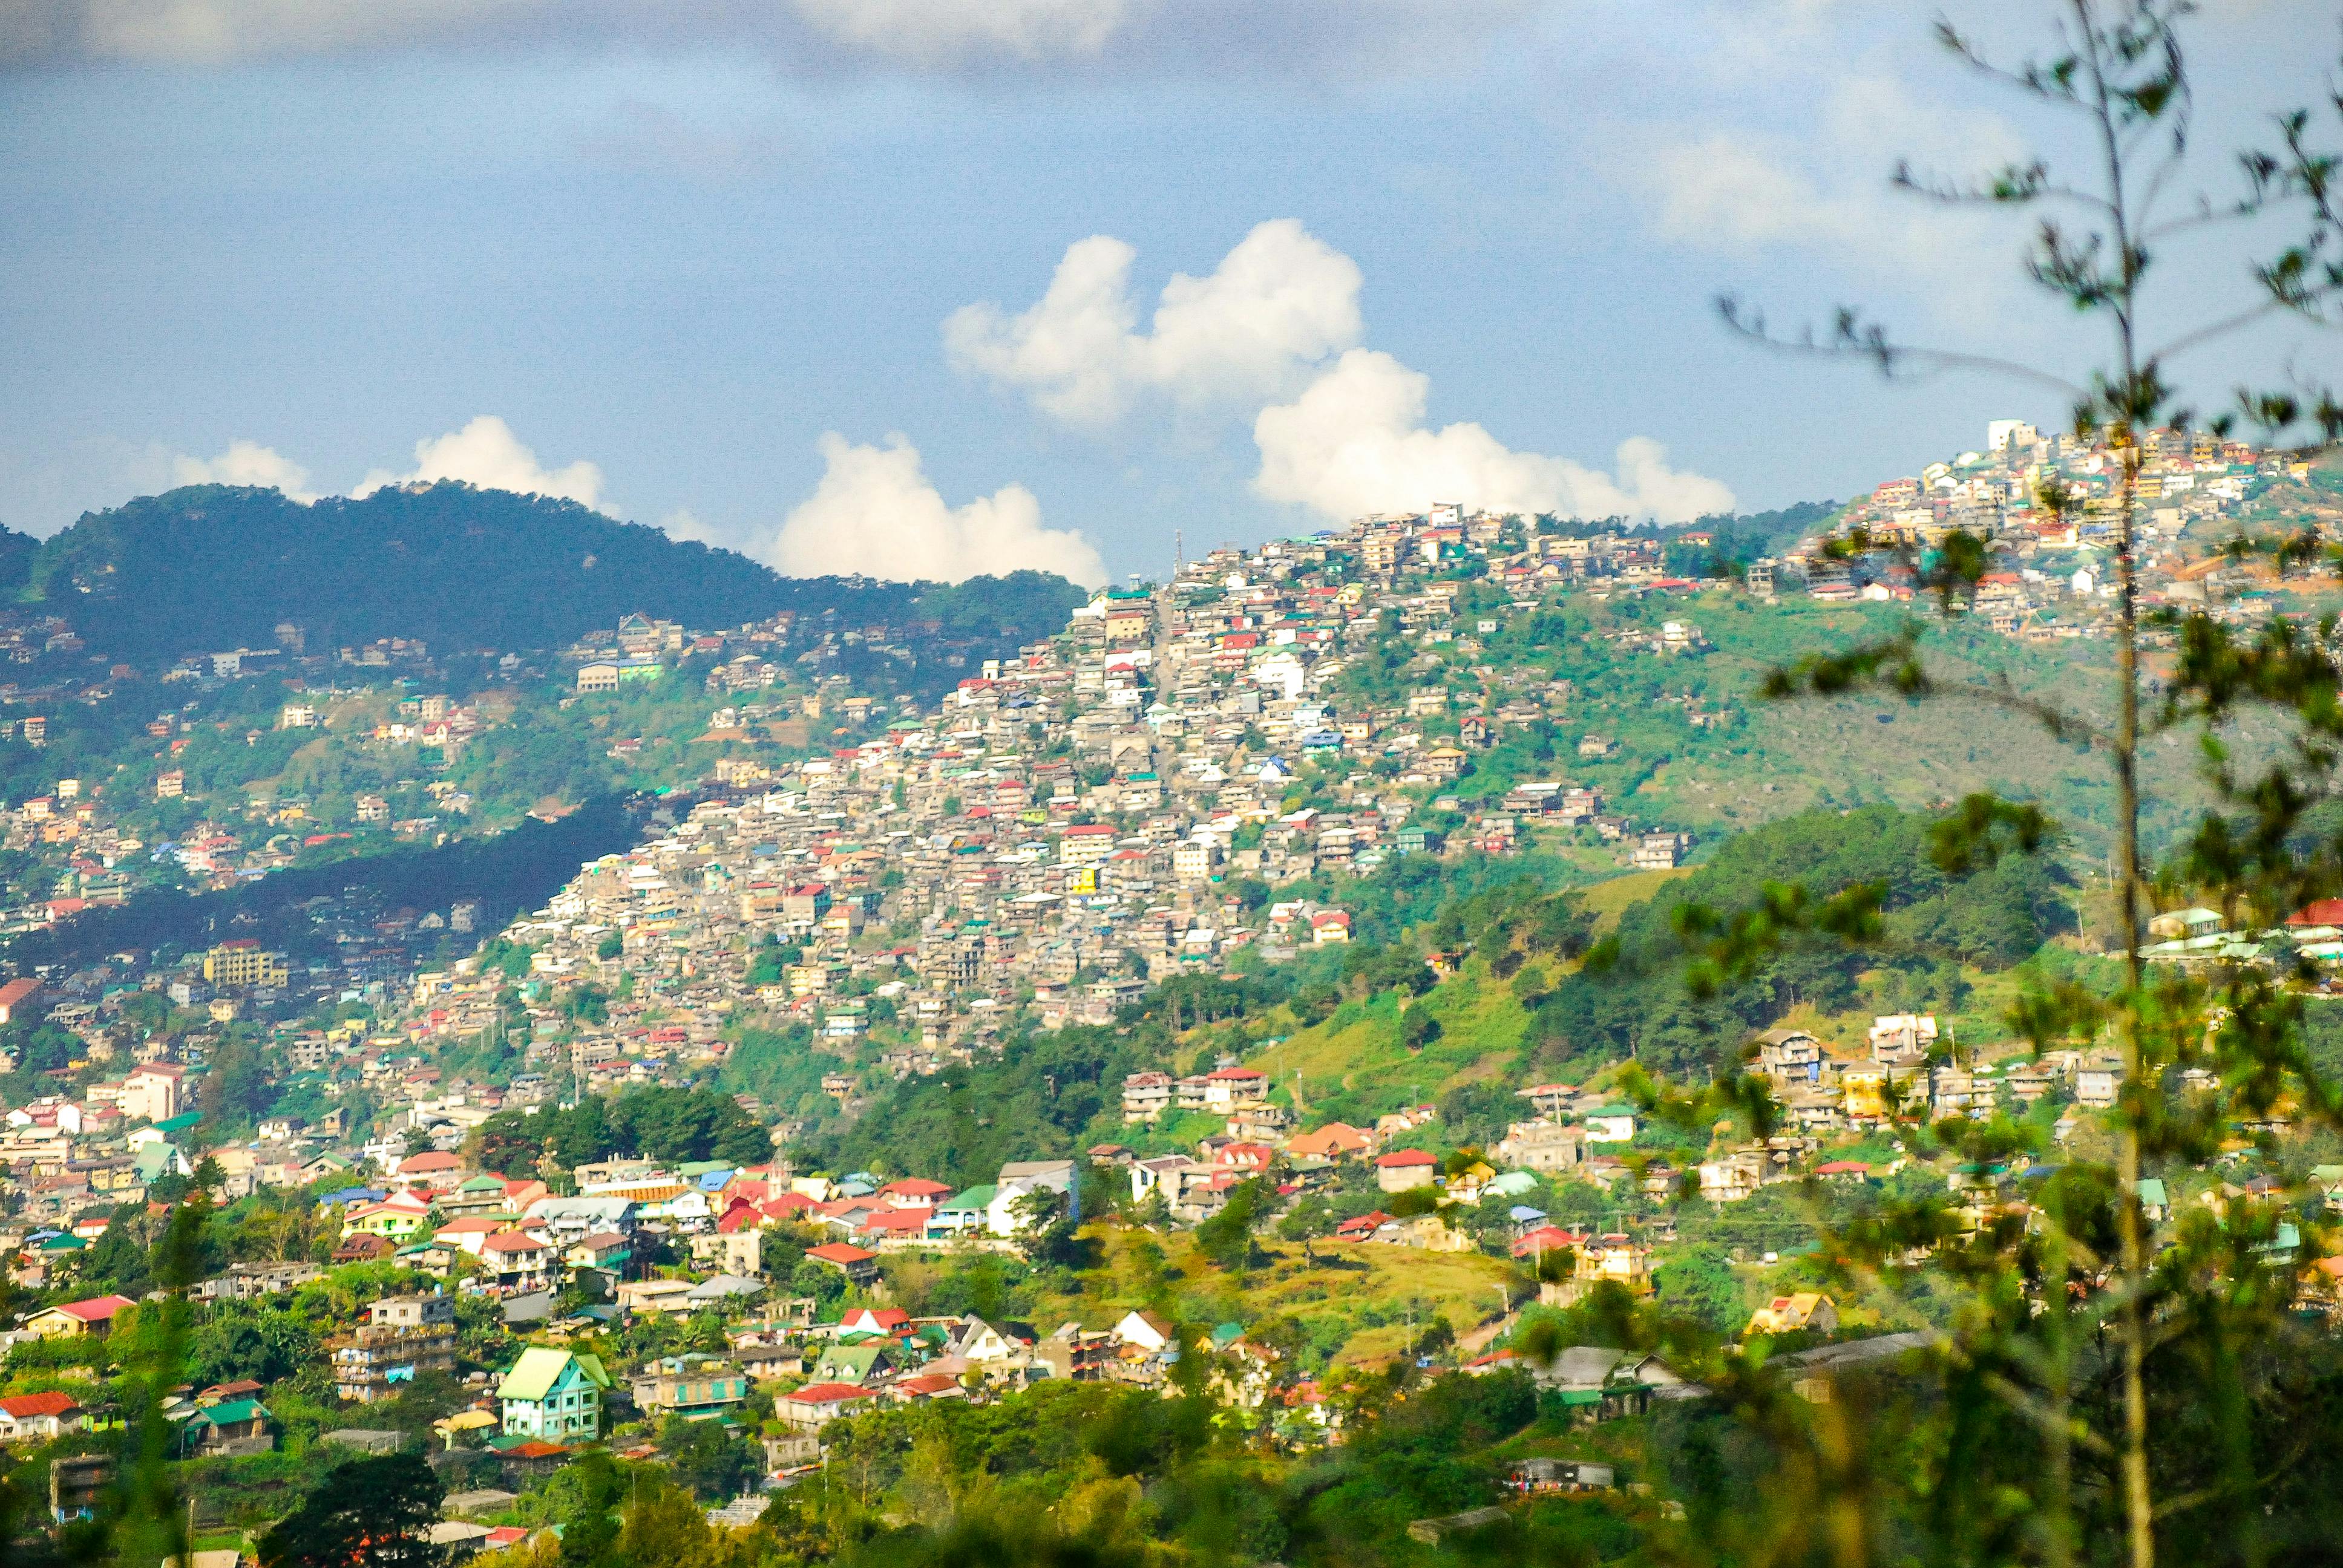 Stunning view of Baguio City from Mines View Park